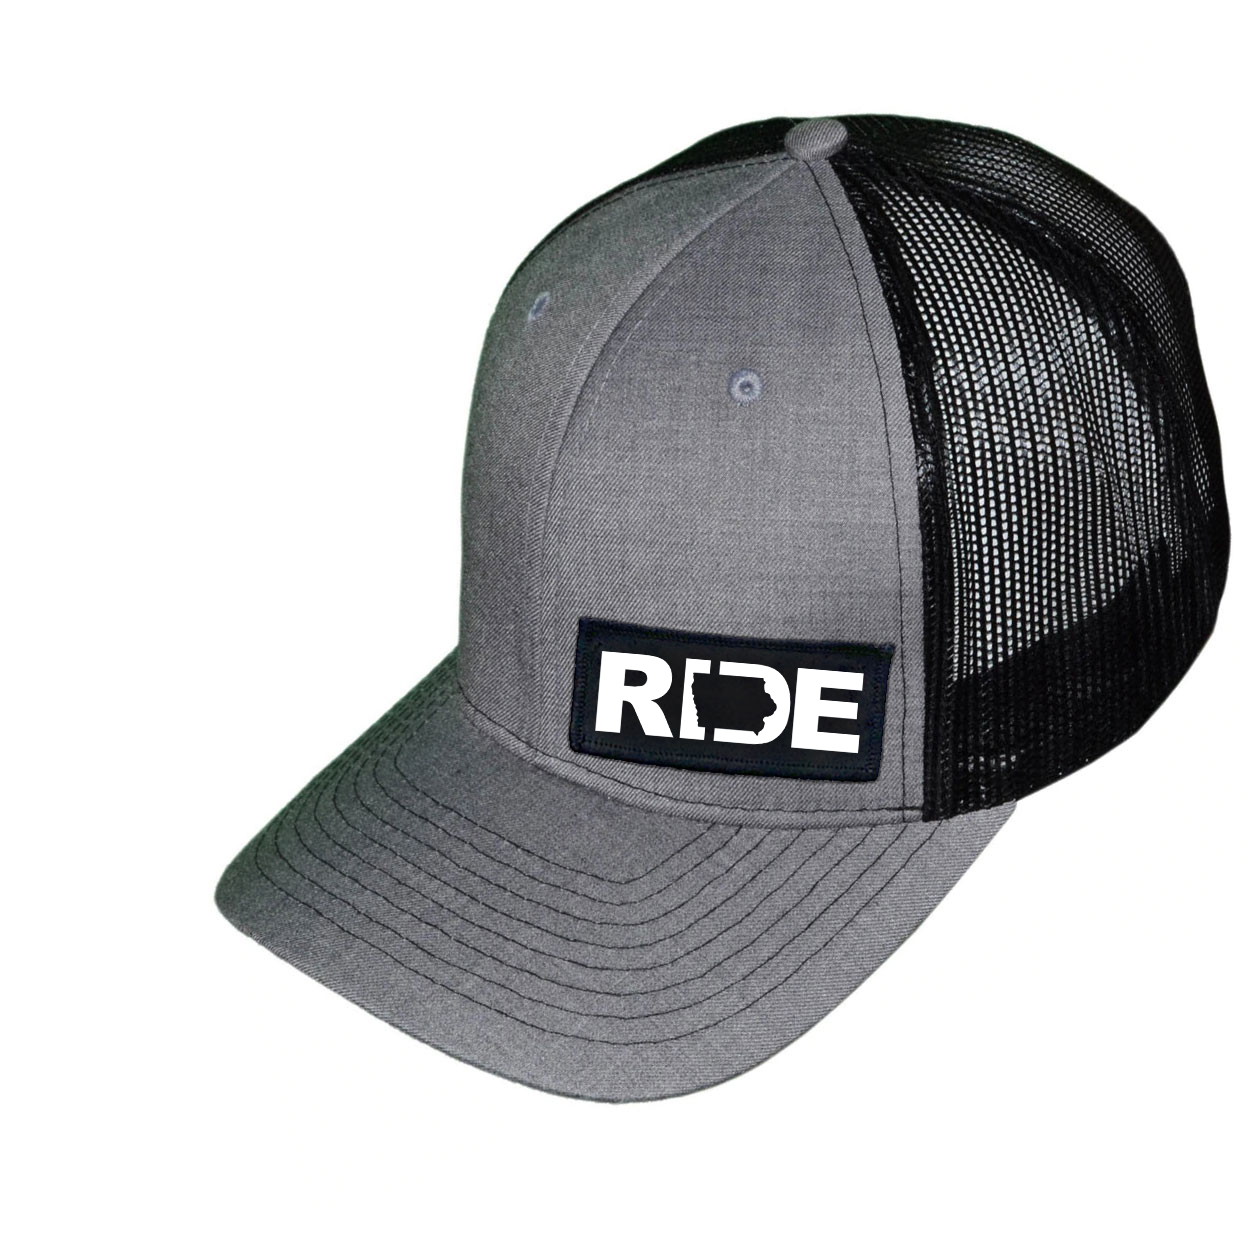 Ride Iowa Classic Pro Night Out Embroidered Snapback Trucker Hat Heather Gray/Black